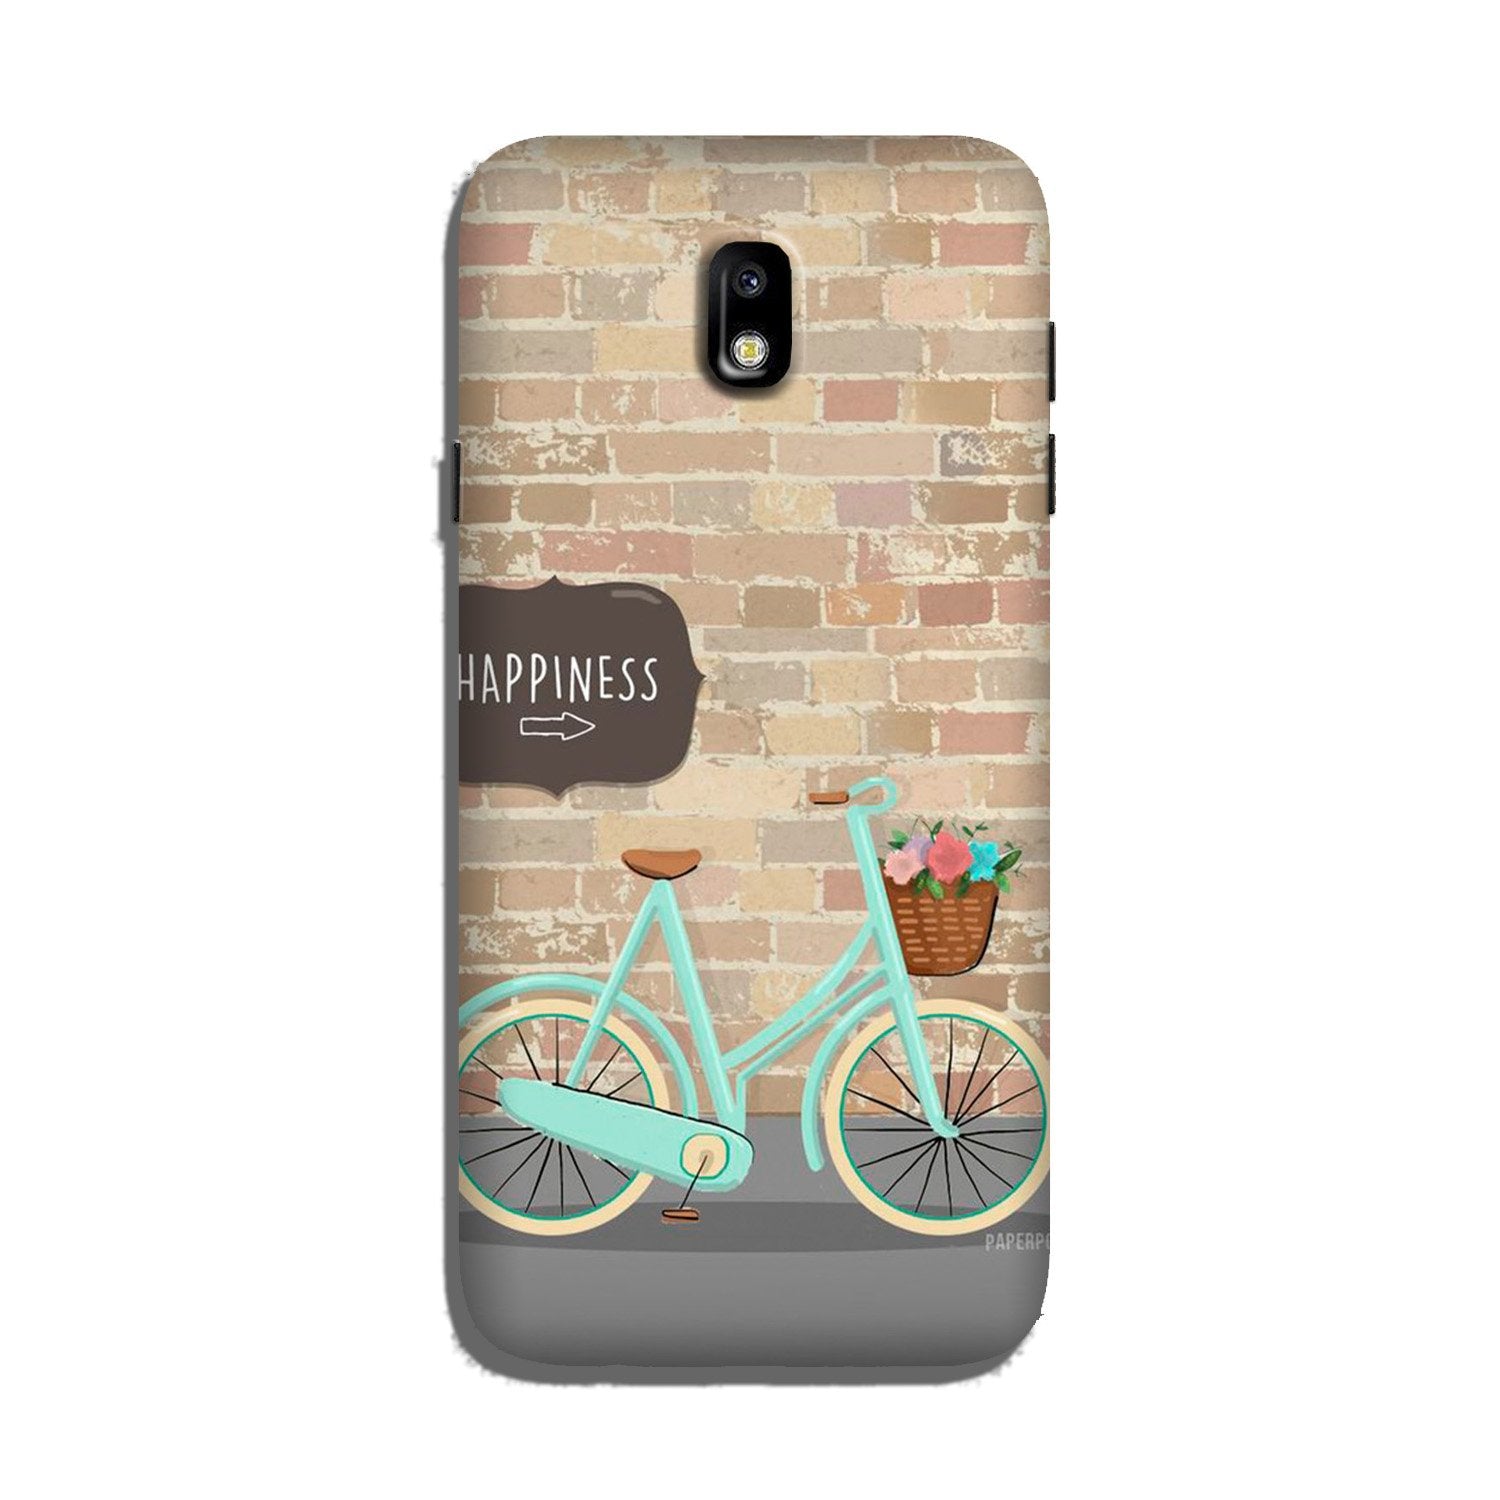 Happiness Case for Galaxy J5 Pro